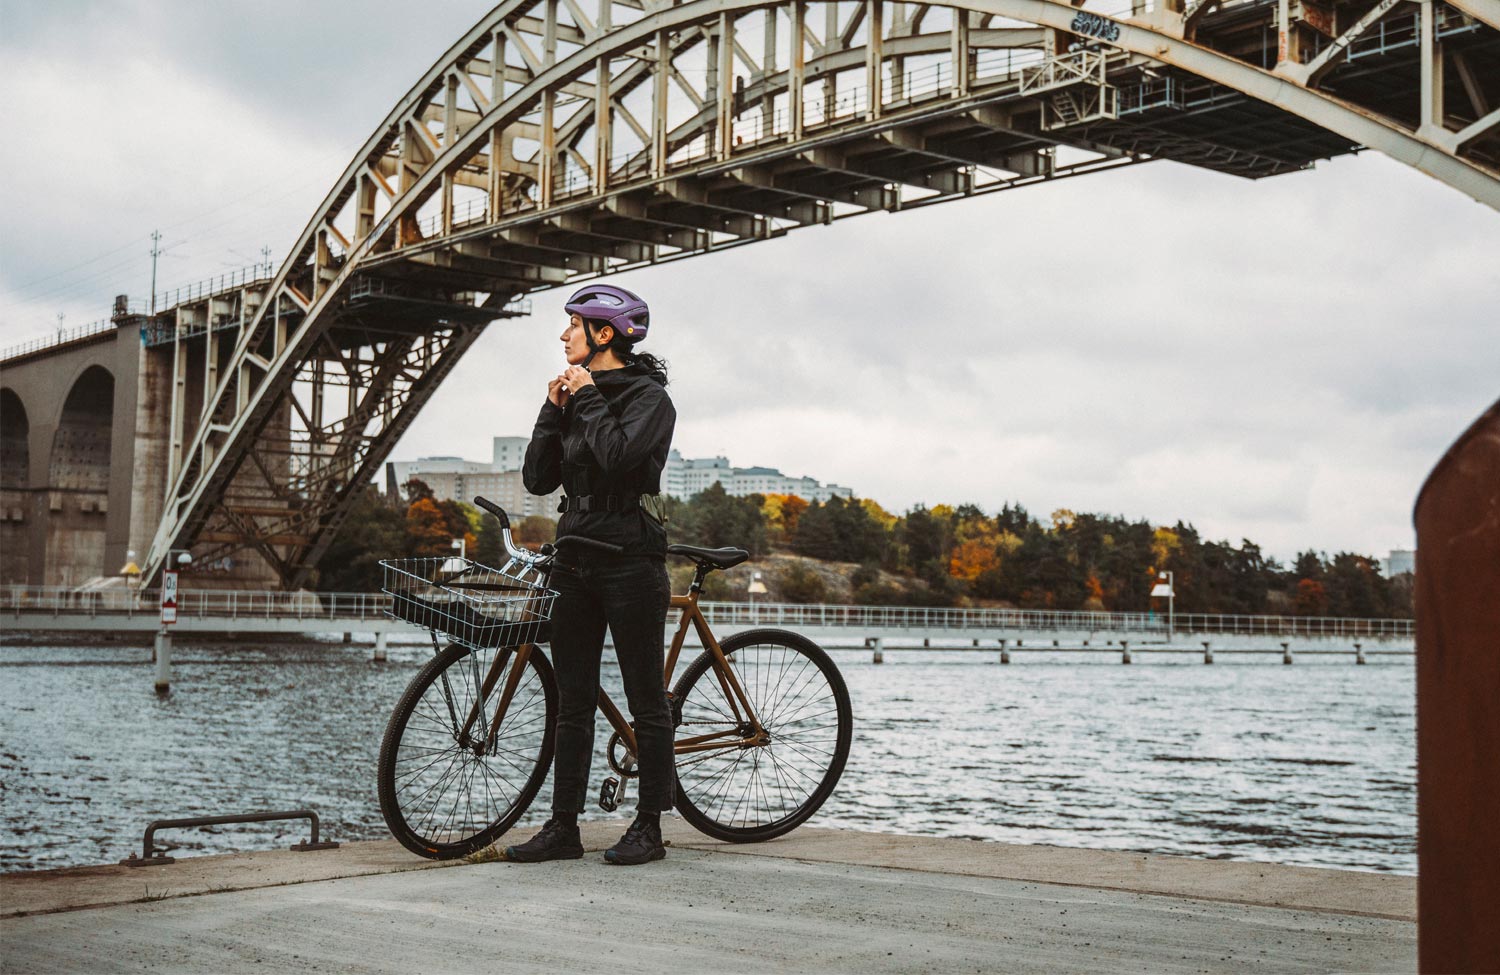 The City and Commuter collection by POC: modern, versatile protection and clothing